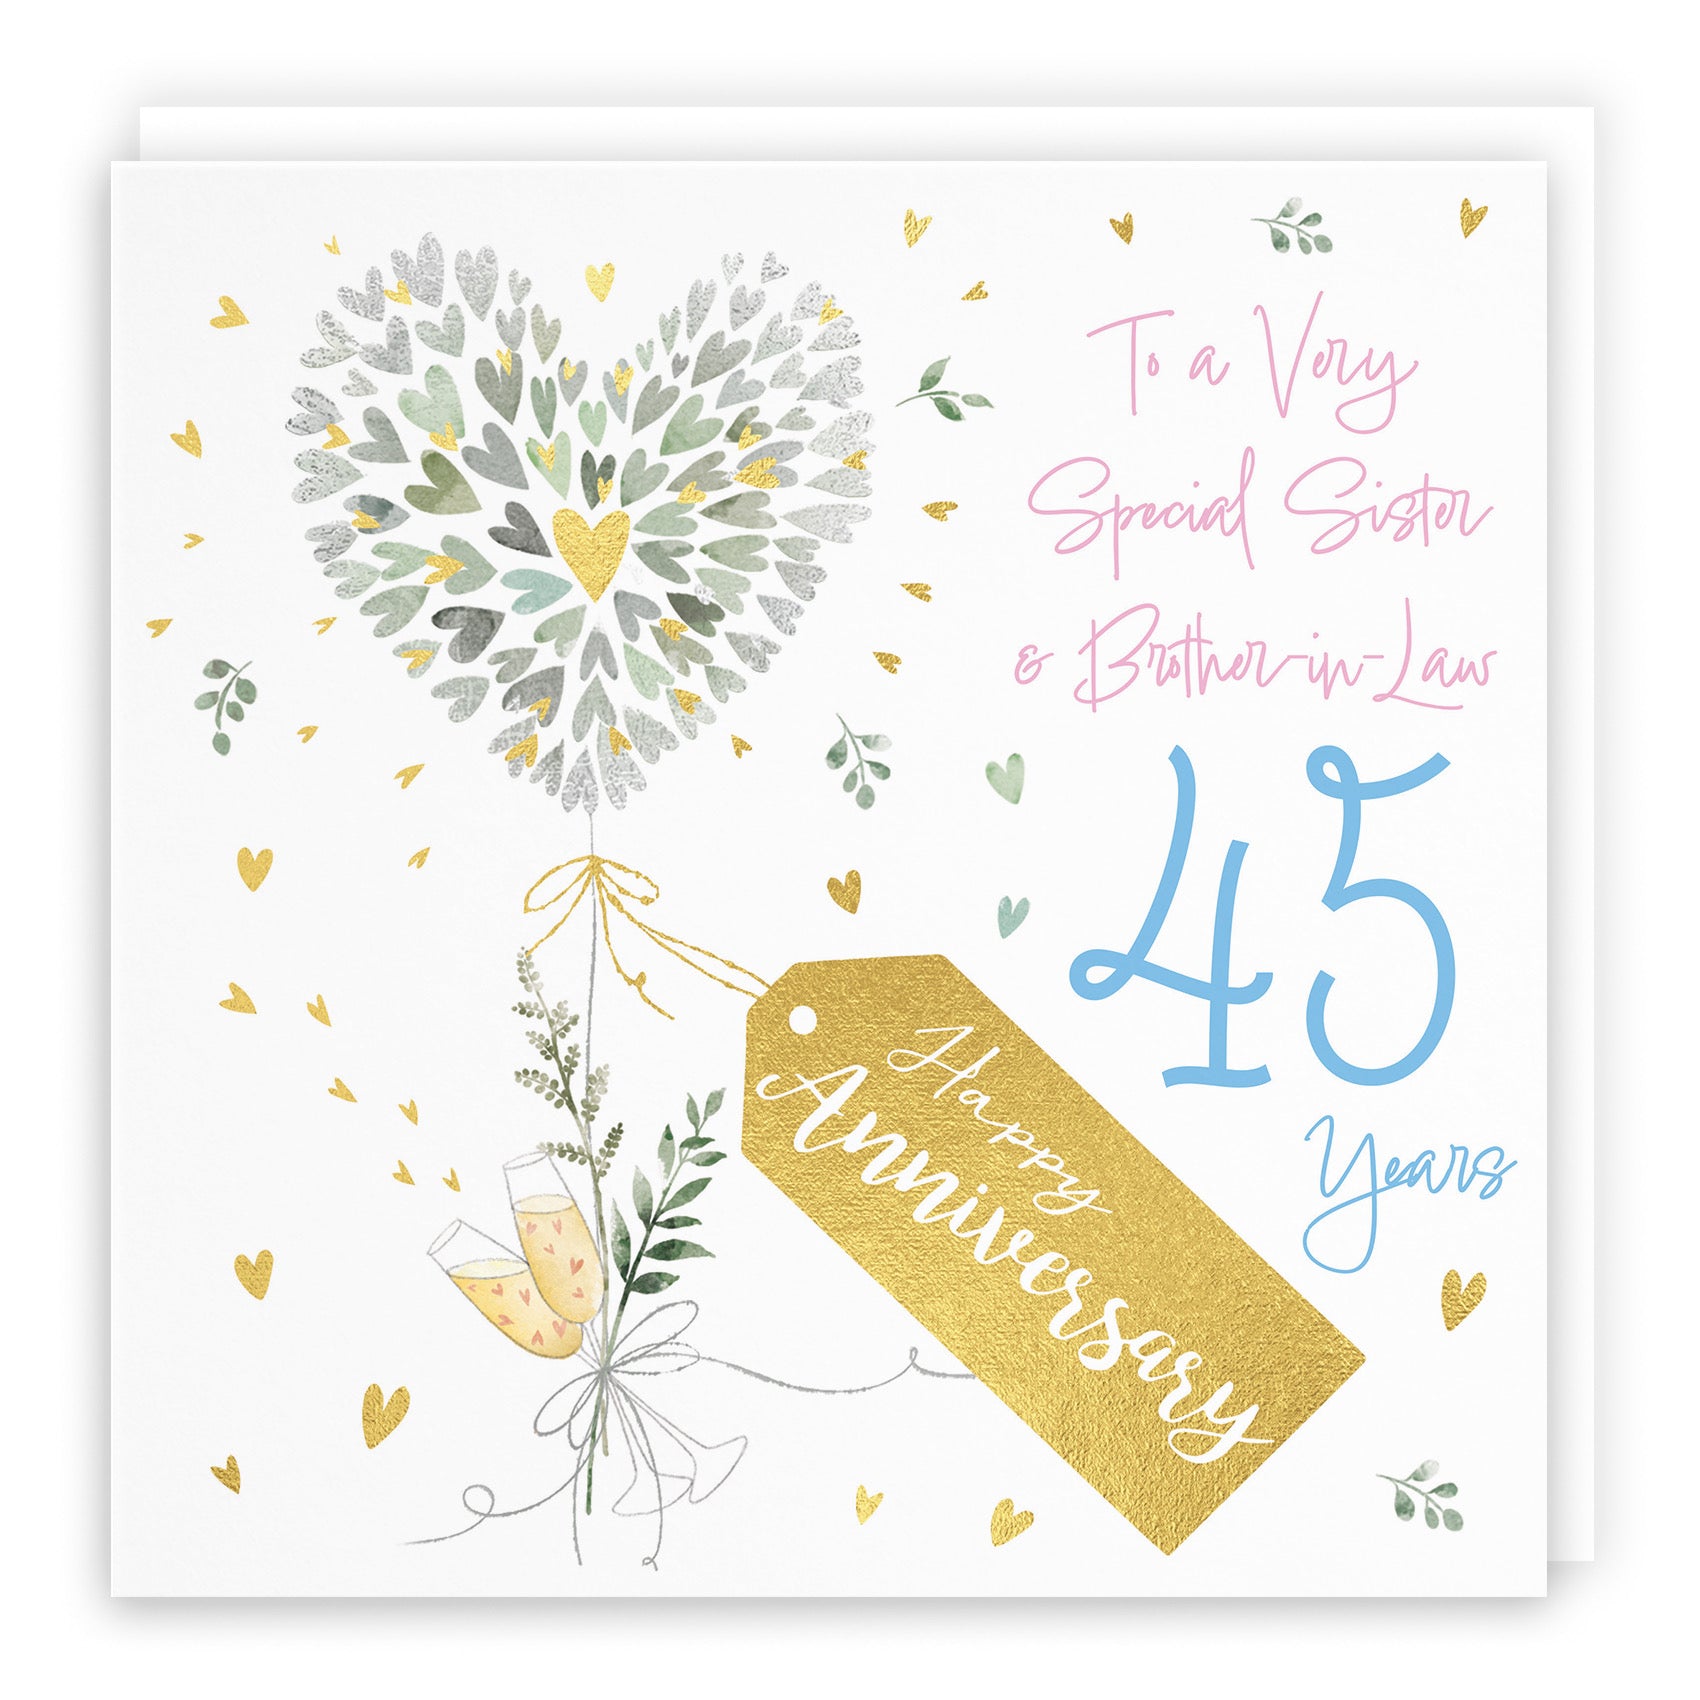 Sister And Brother-in-Law 45th Anniversary Card Contemporary Hearts Milo's Gallery - Default Title (B0CKJ5VSL6)